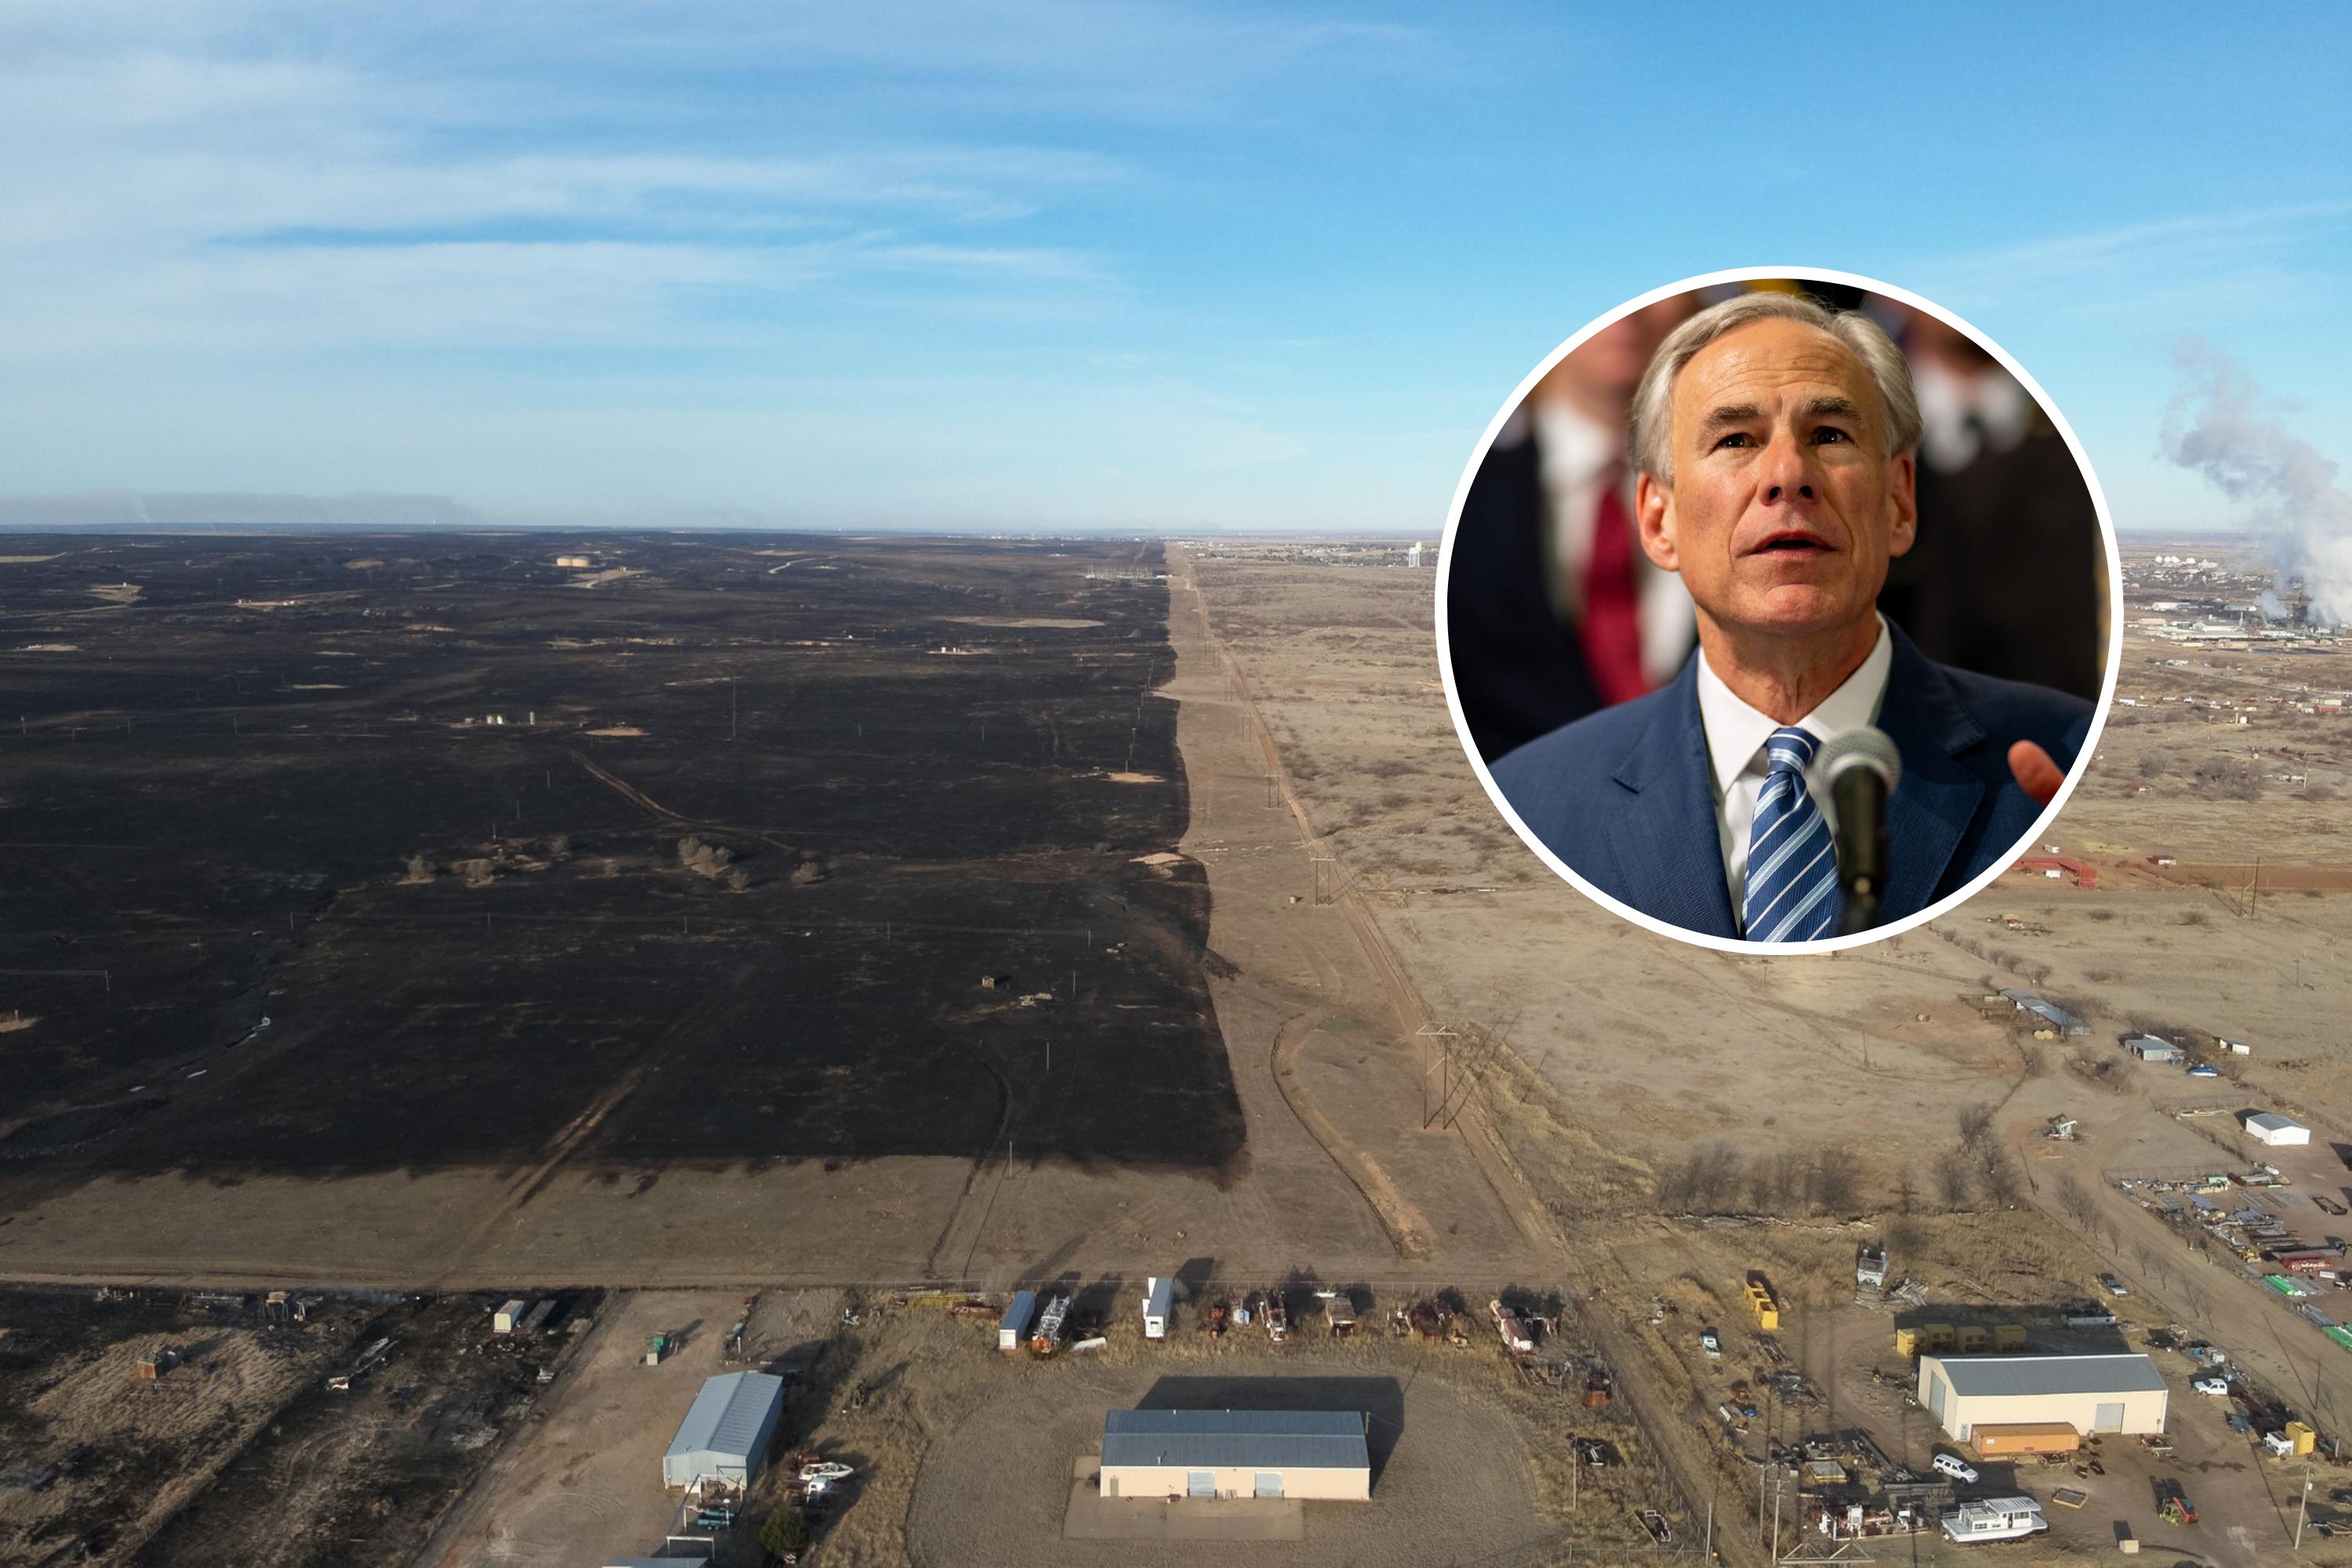 greg abbott suspends laws as texas grapples with devastating wildfires